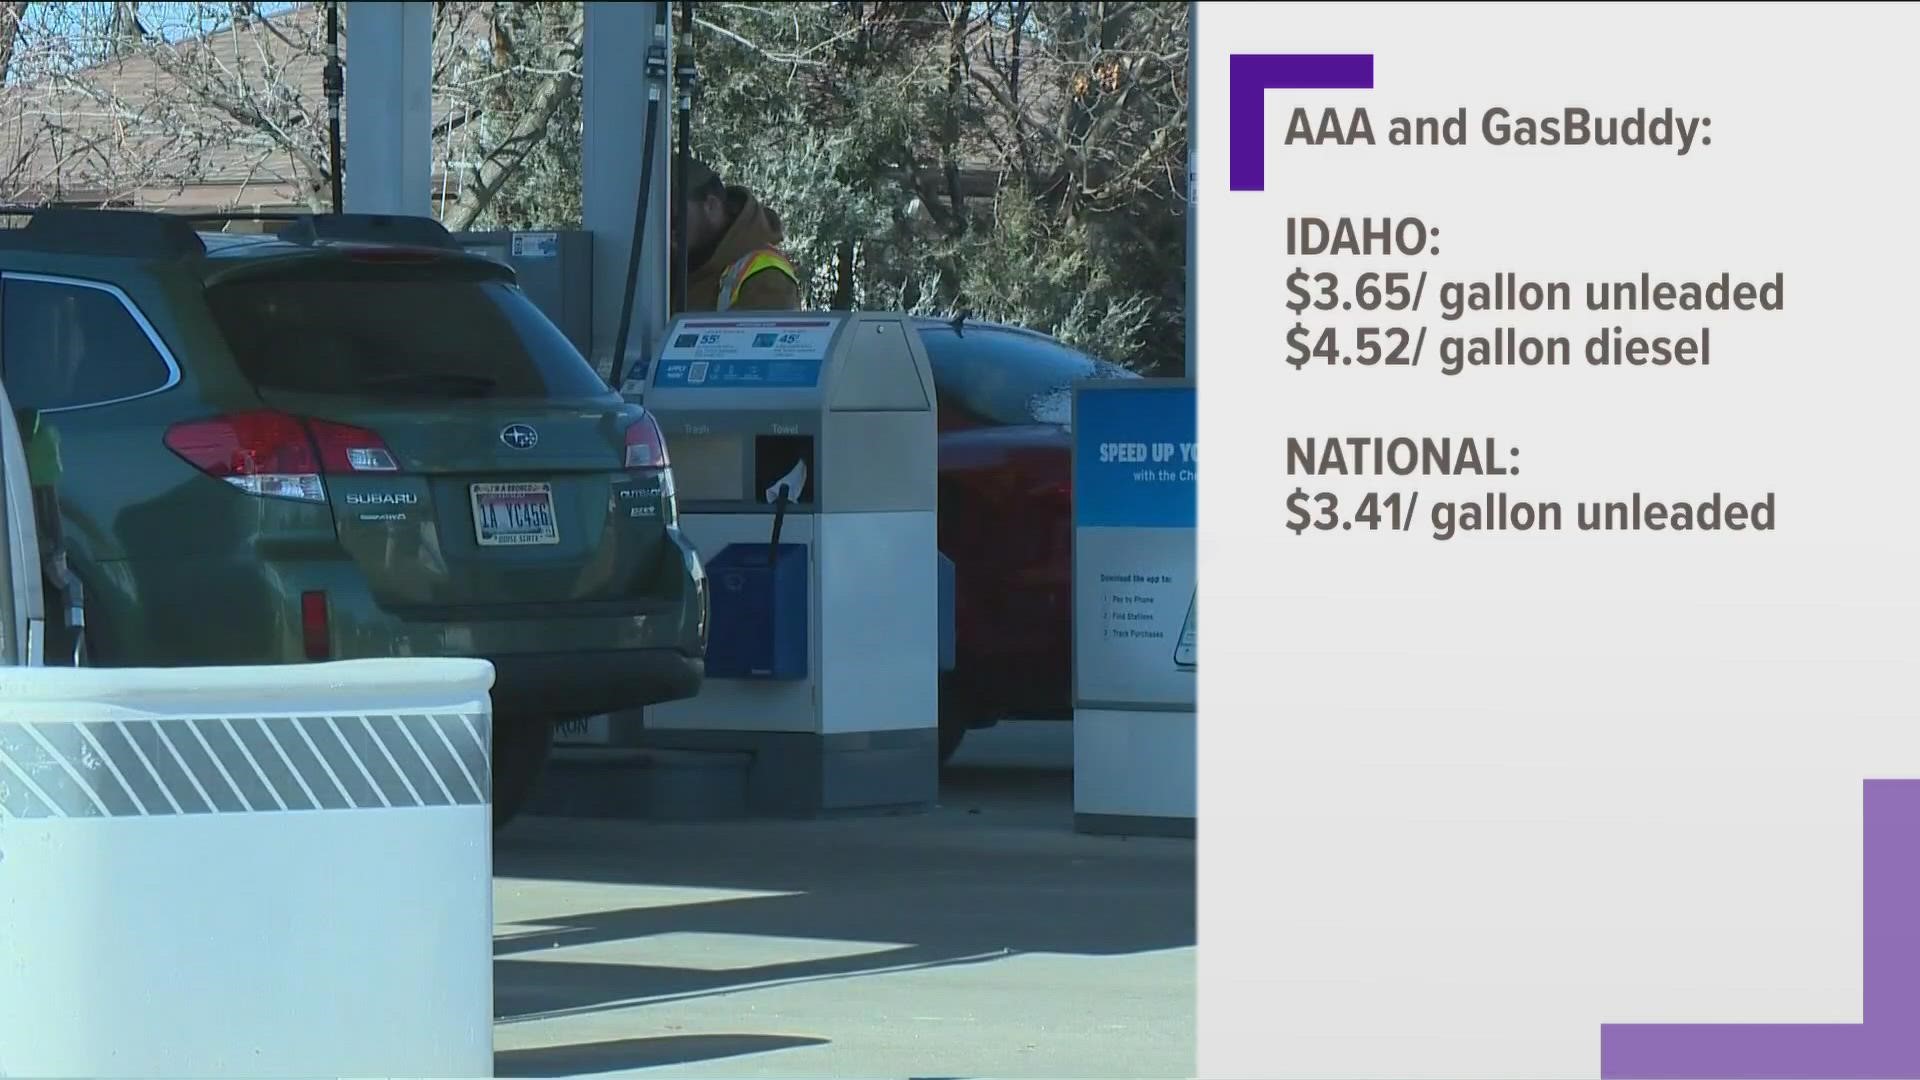 Average prices around the state range from $3.29 for a gallon of regular unleaded in Lemhi County to $3.99 in Blaine County.